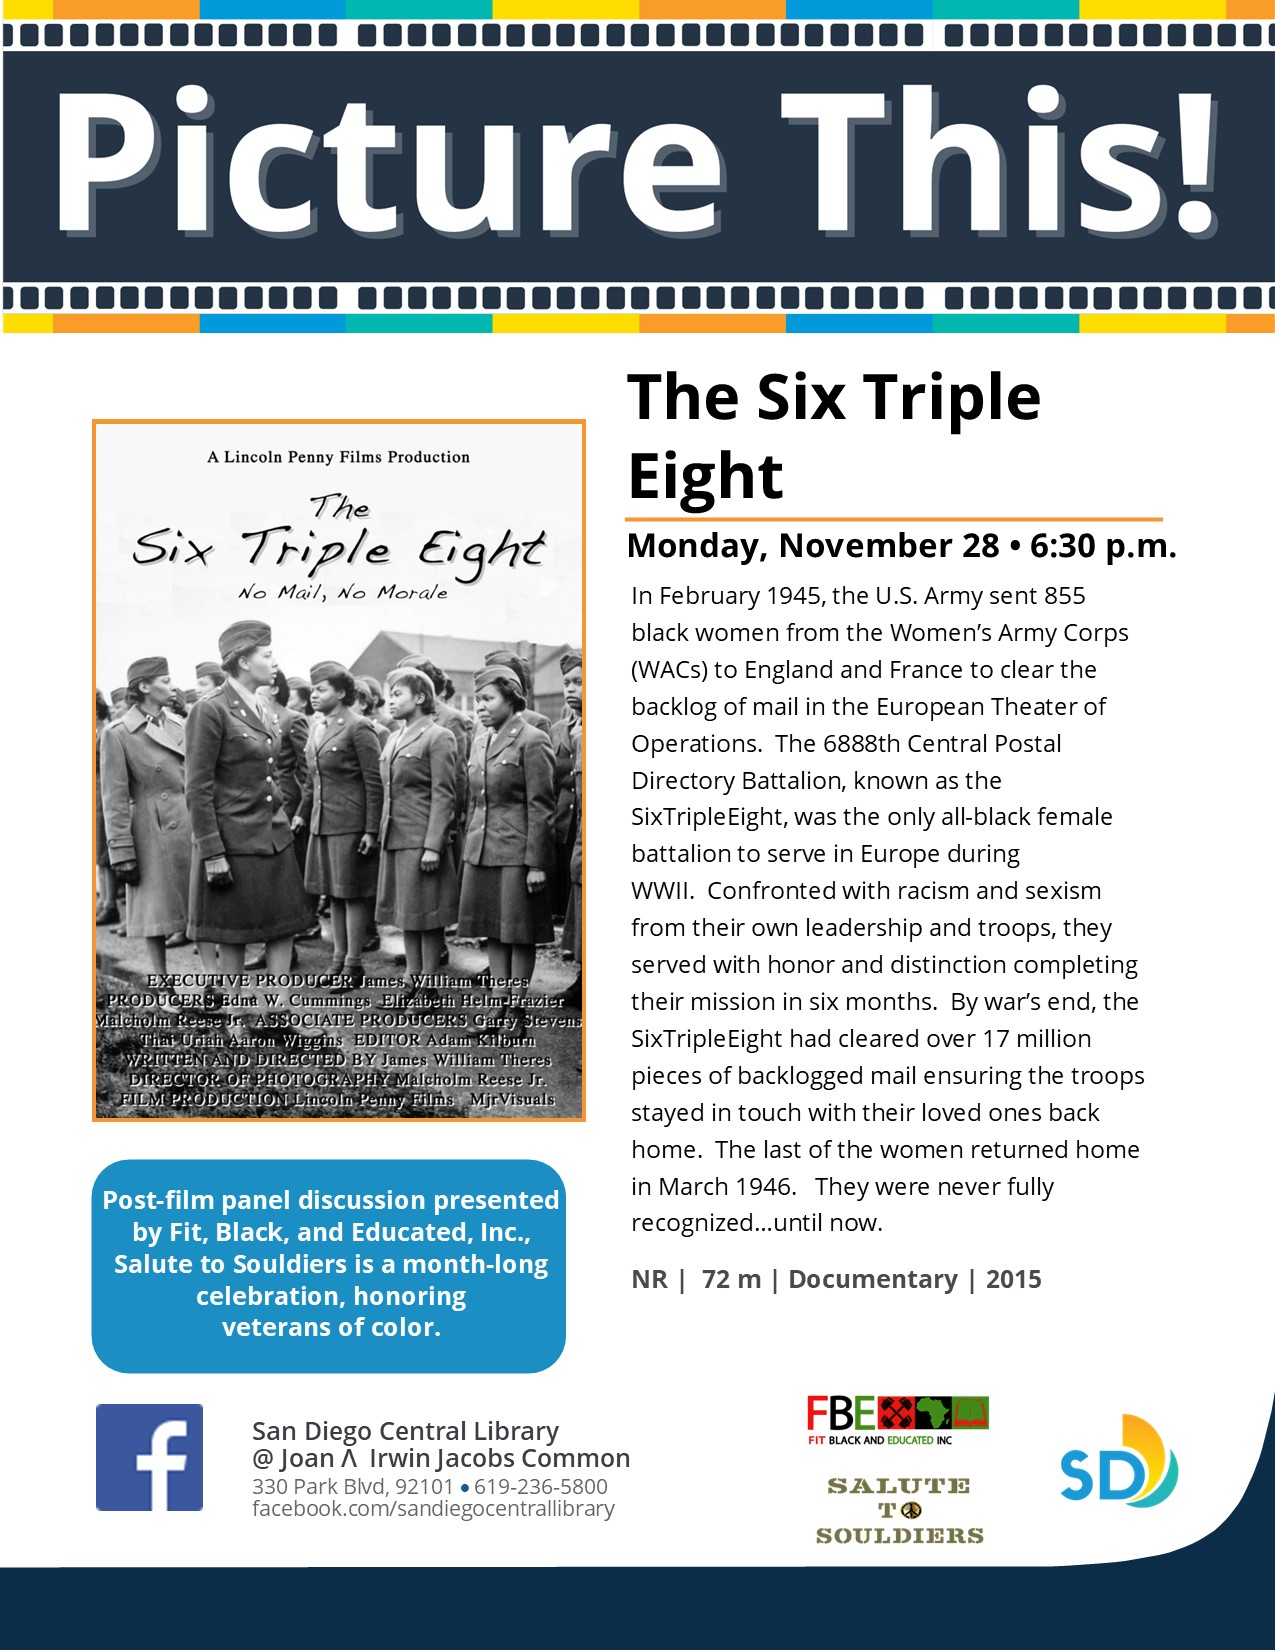 Flyer for screening of the film The Six Triple Eight.